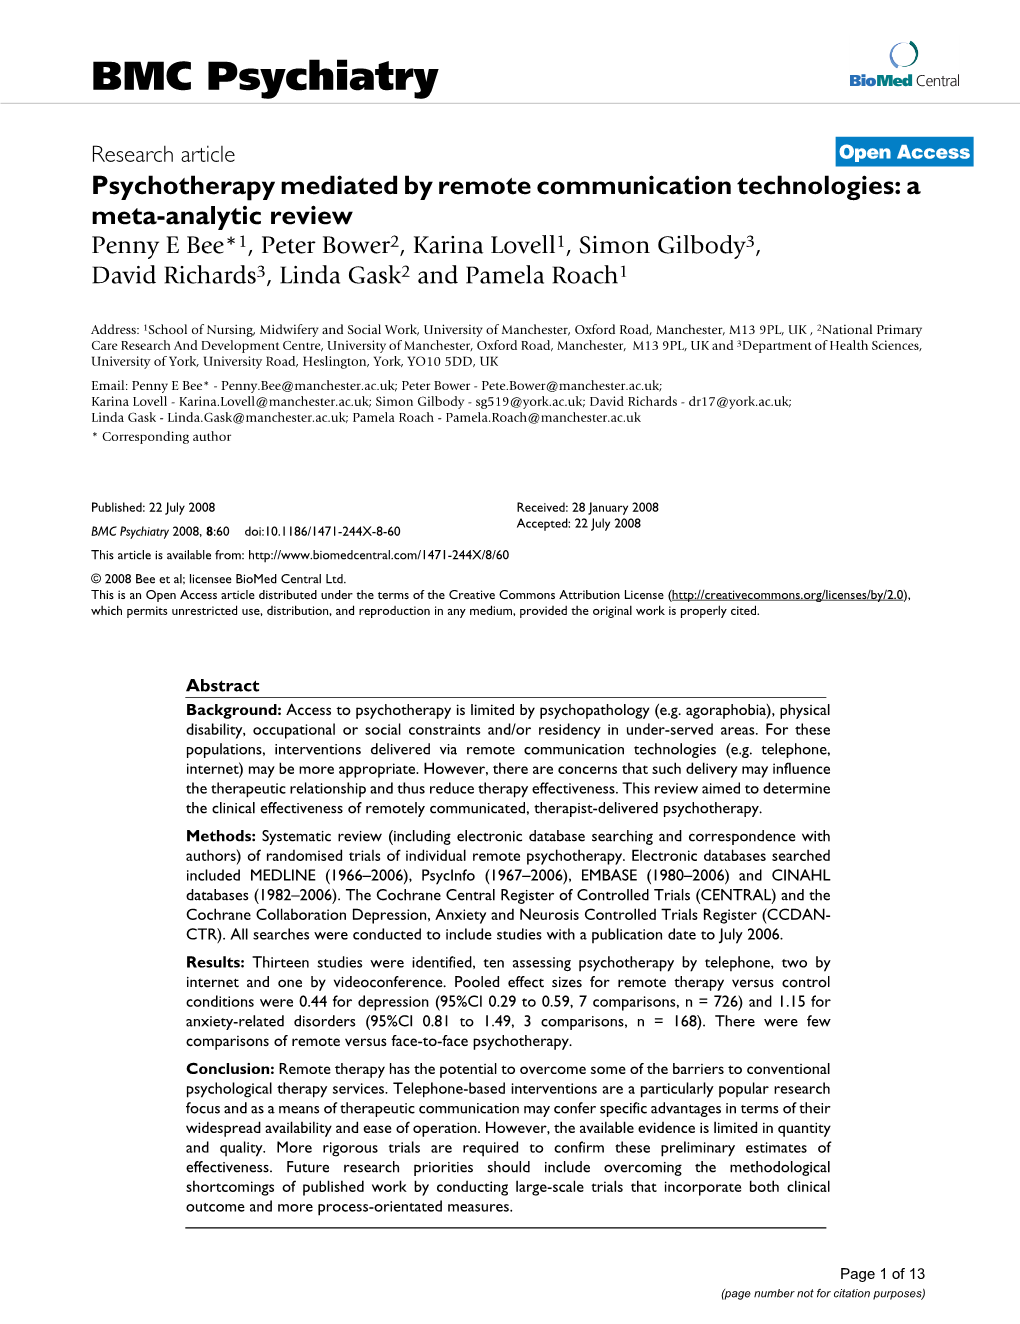 Psychotherapy Mediated by Remote Communication Technologies: A